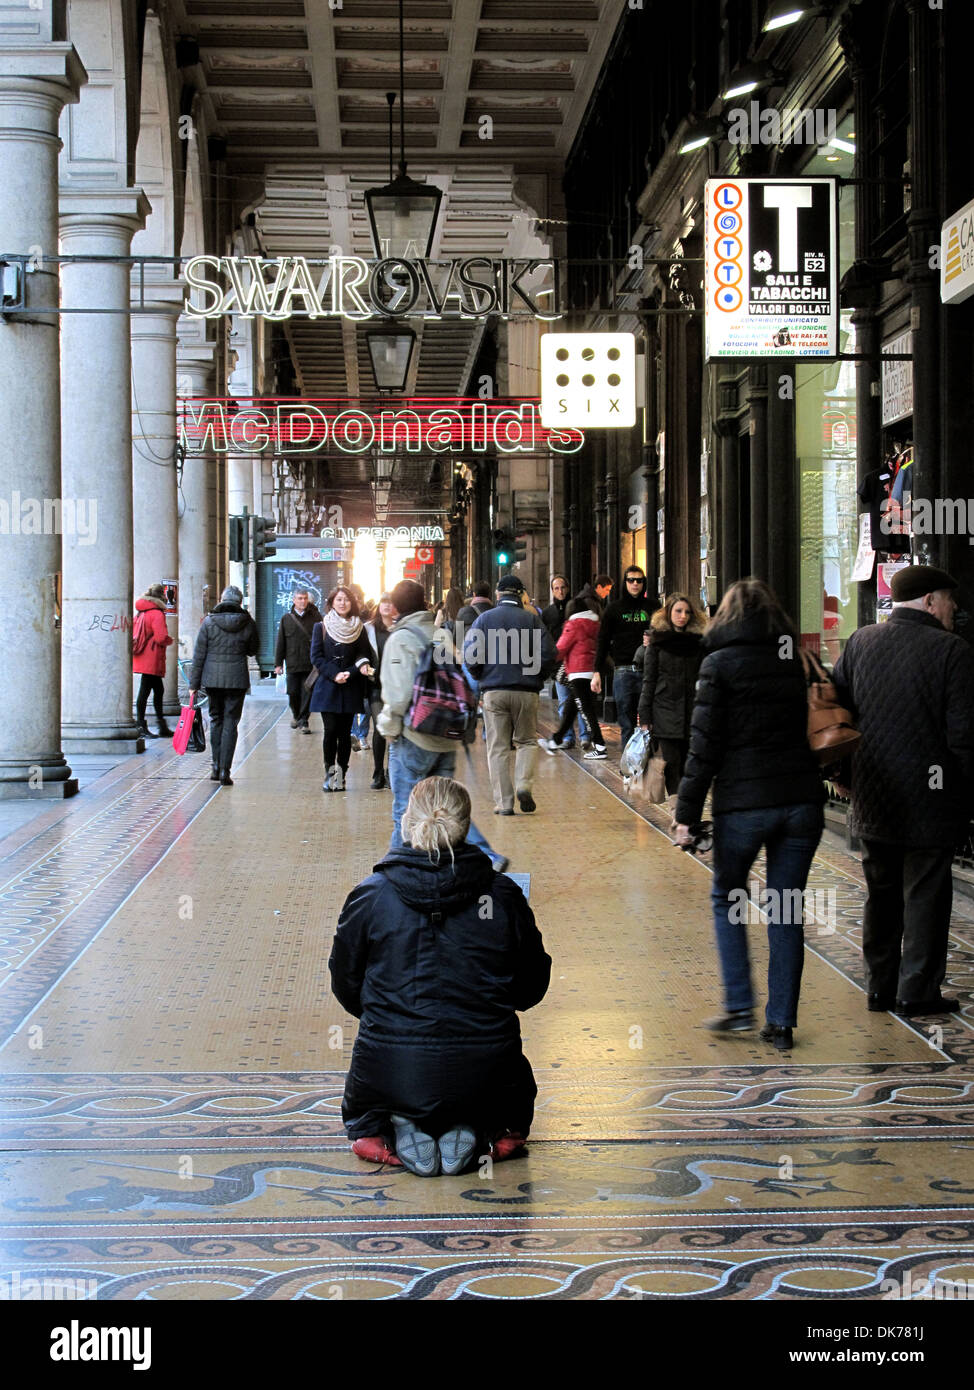 A homeless woman kneeling on a mosaic pavement in an arcade along Via XX Settembre in Genoa. Stock Photo